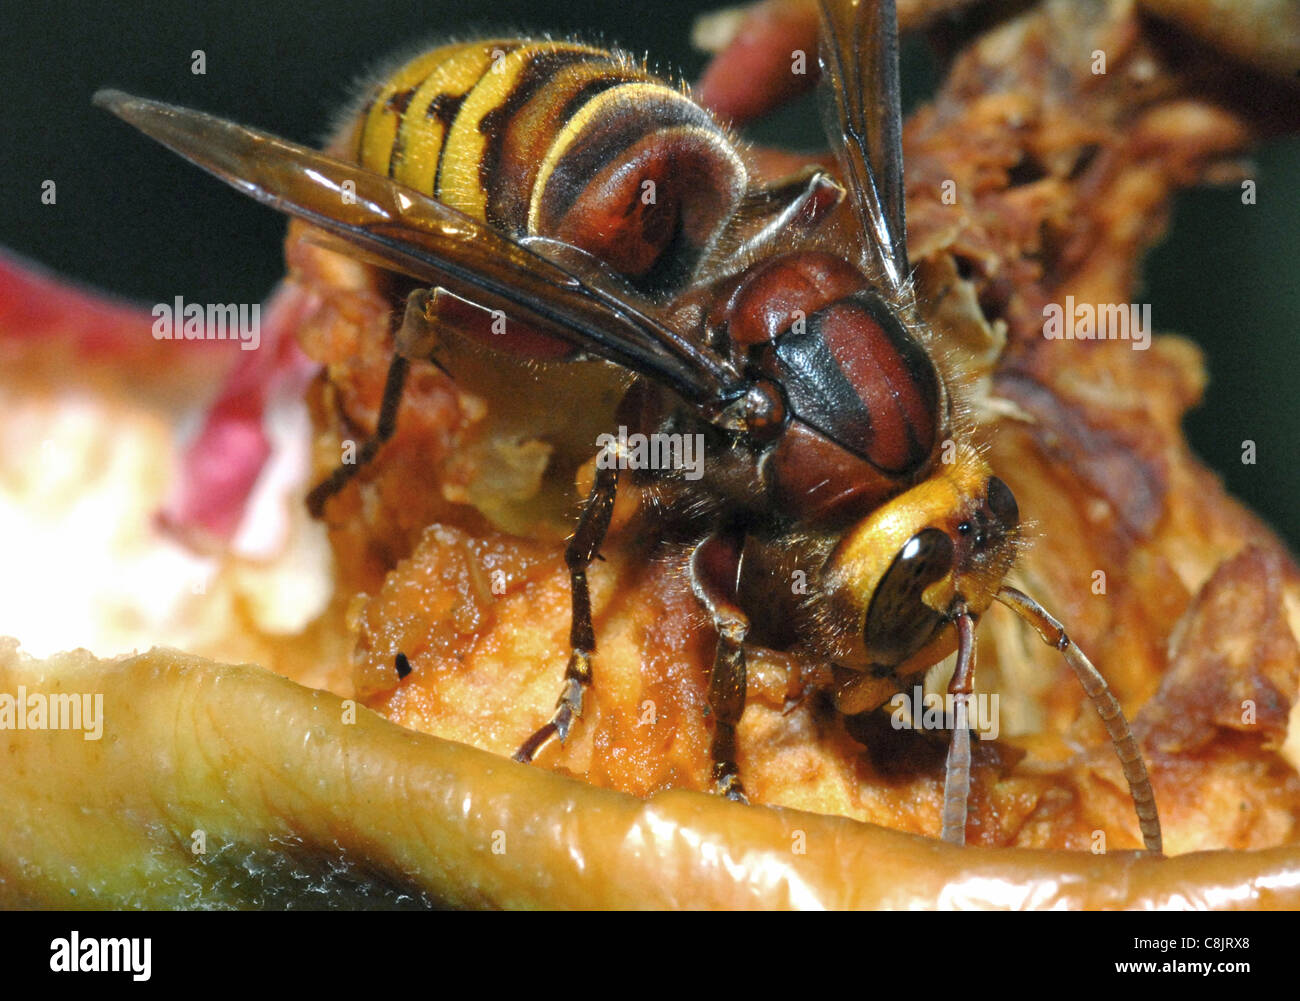 HORNET (Vespa crabro) Increasingly common in the UK the hornet has a well deserved reputaion for its sting and bad temper. Often nests are in buildings the stings will come from a large number of hornets if the nest is disturbed. Stock Photo